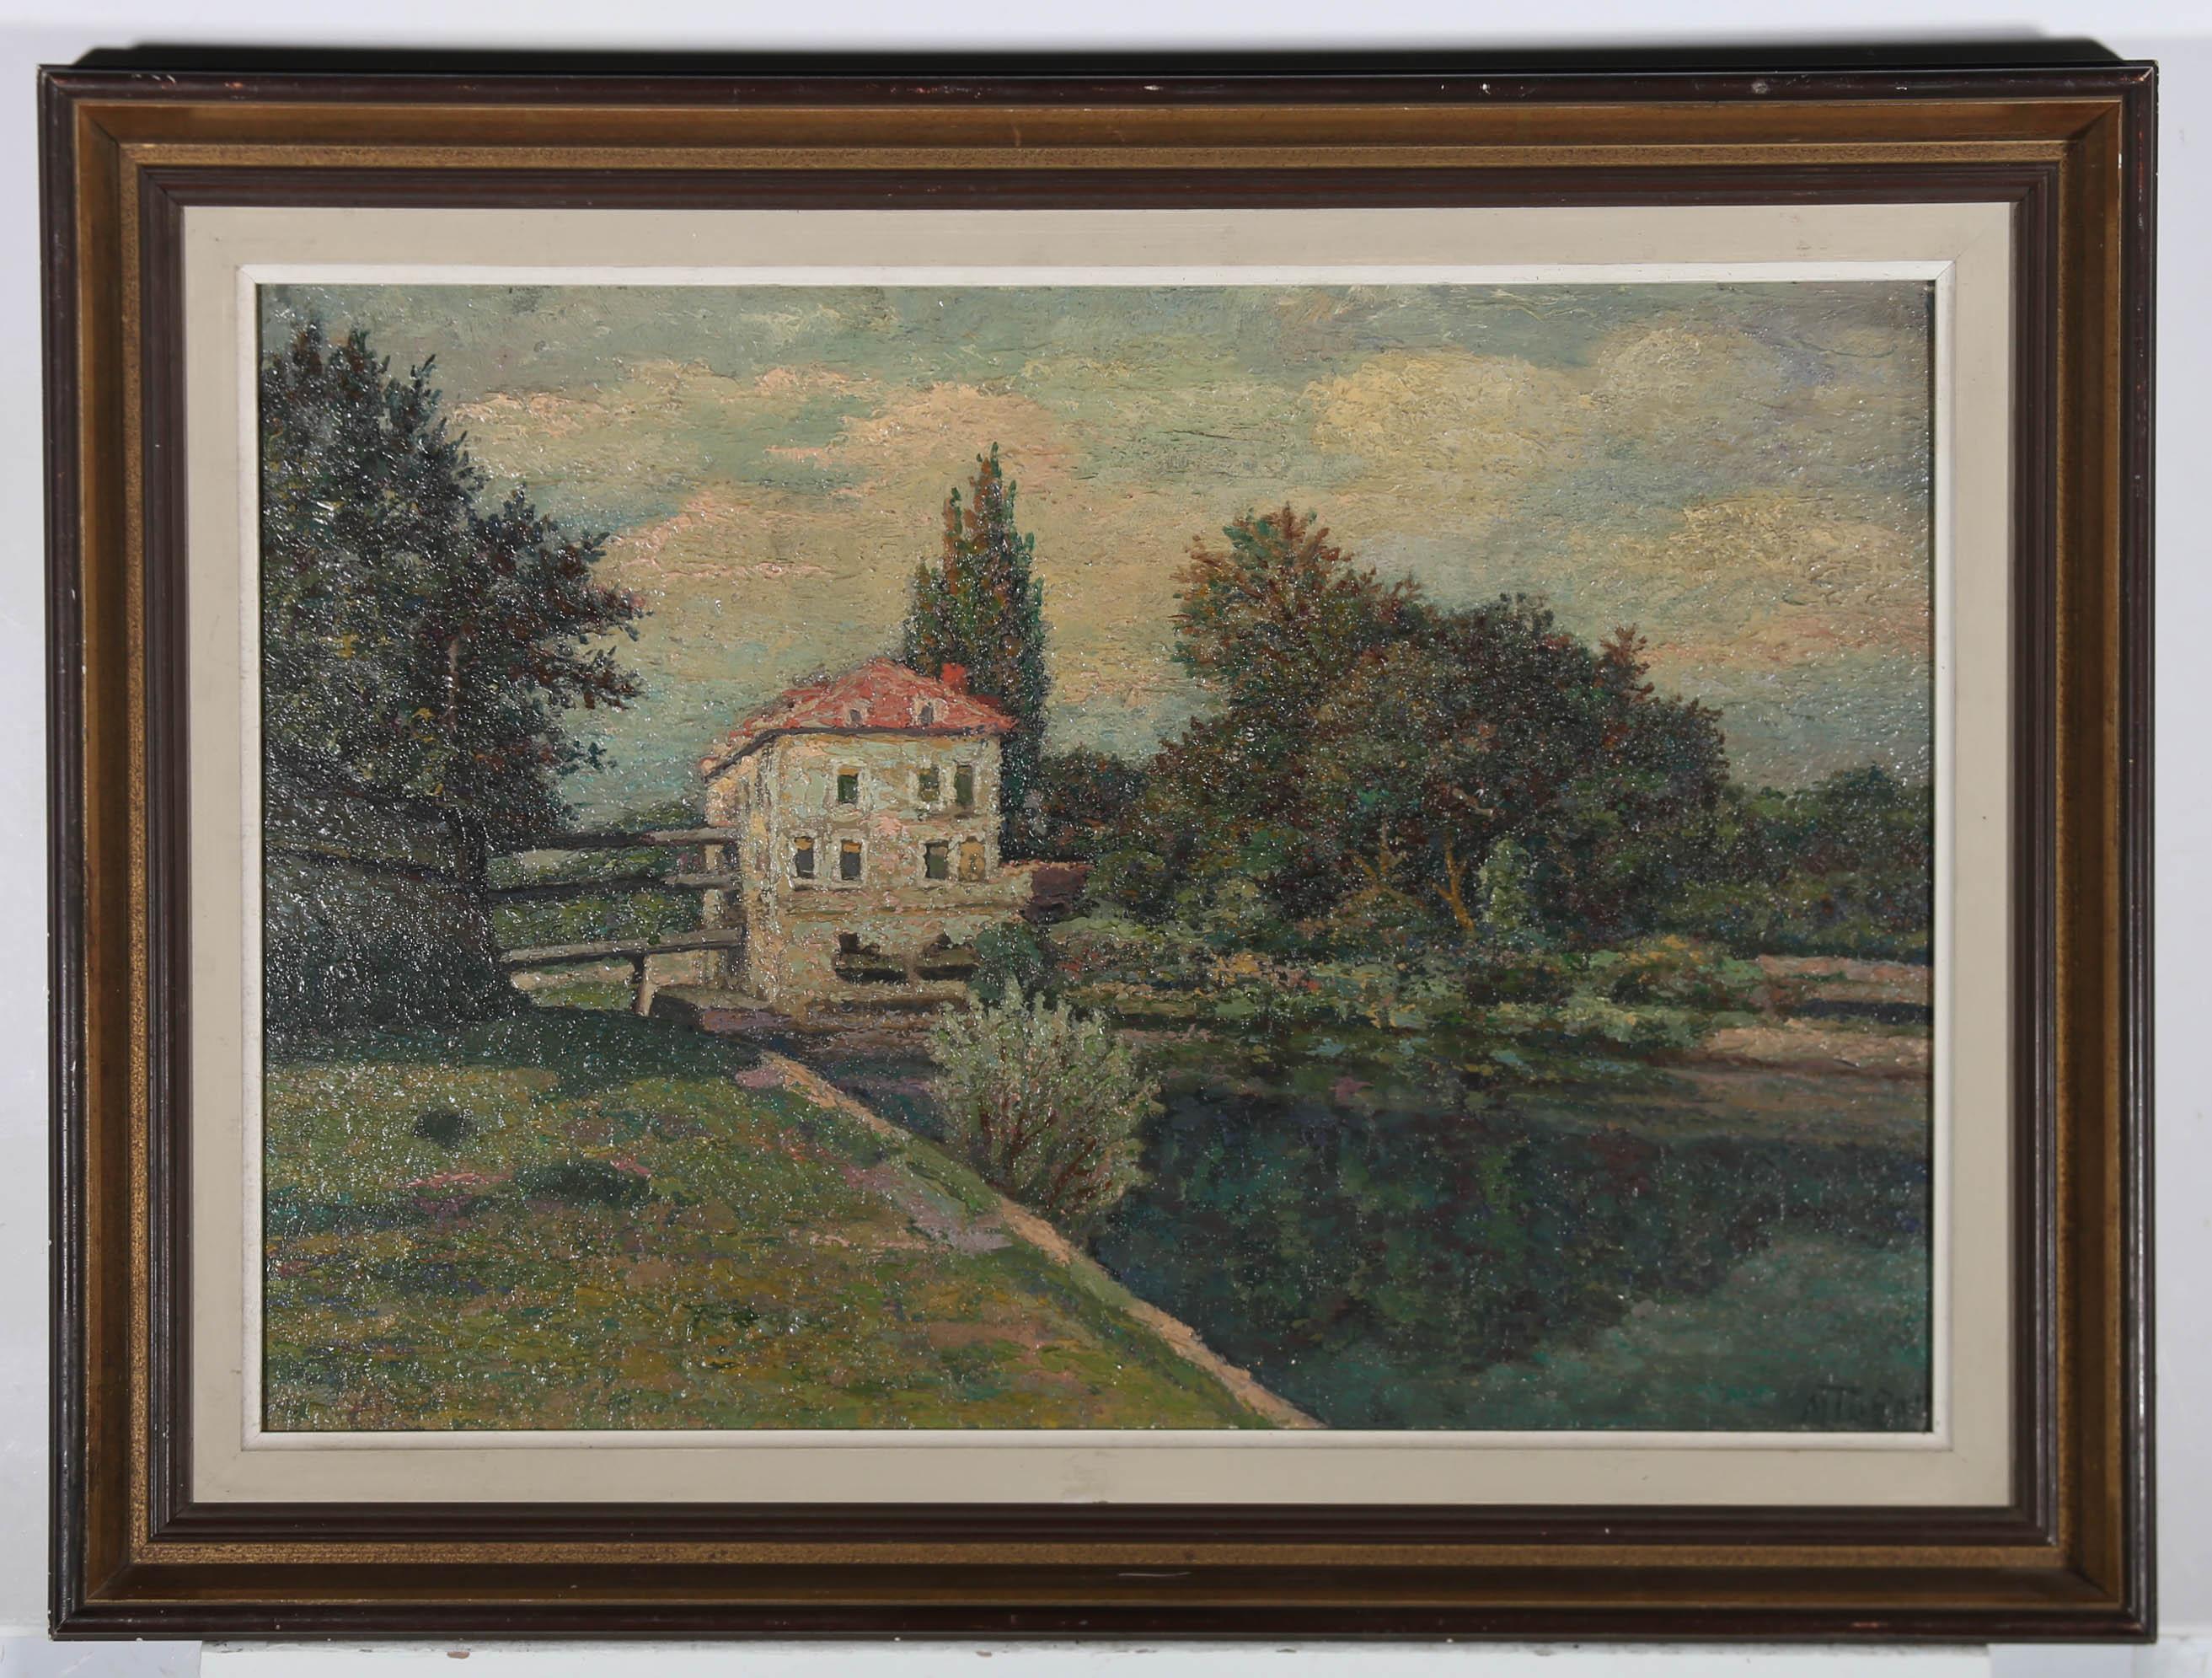 An idyllic Summer scene in impasto oil, showing a river in verdant countryside with a pretty white house on the far bank. The artist has signed illegibly to the lower right corner and the painting has been presented in a 20th Century frame. On